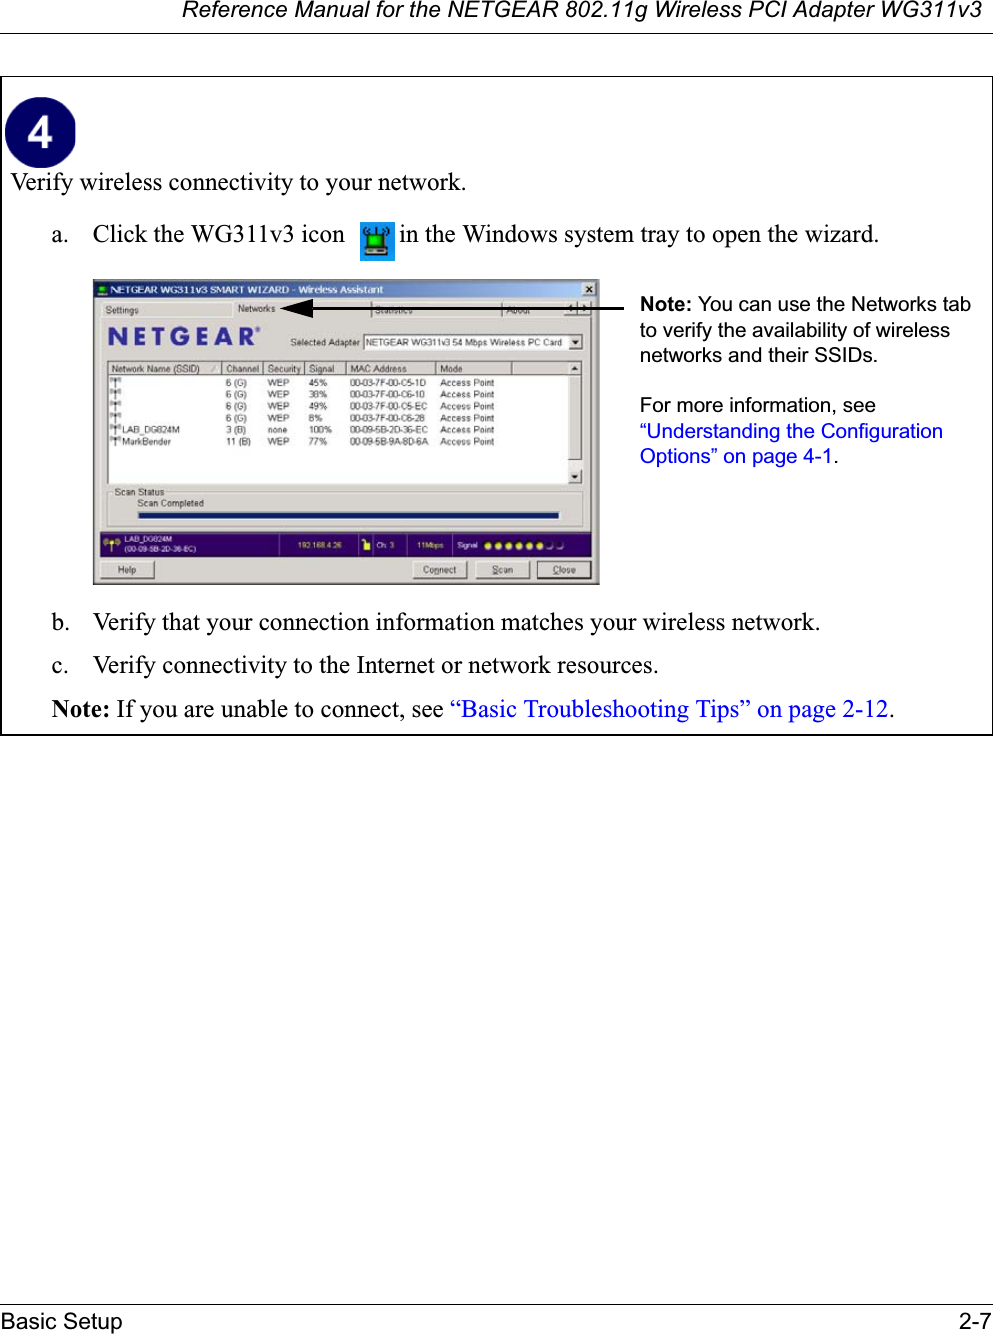 Reference Manual for the NETGEAR 802.11g Wireless PCI Adapter WG311v3Basic Setup 2-7Verify wireless connectivity to your network.a. Click the WG311v3 icon  in the Windows system tray to open the wizard.b. Verify that your connection information matches your wireless network. c. Verify connectivity to the Internet or network resources.Note: If you are unable to connect, see “Basic Troubleshooting Tips” on page 2-12.Note: You can use the Networks tab to verify the availability of wireless networks and their SSIDs. For more information, see “Understanding the Configuration Options” on page 4-1.